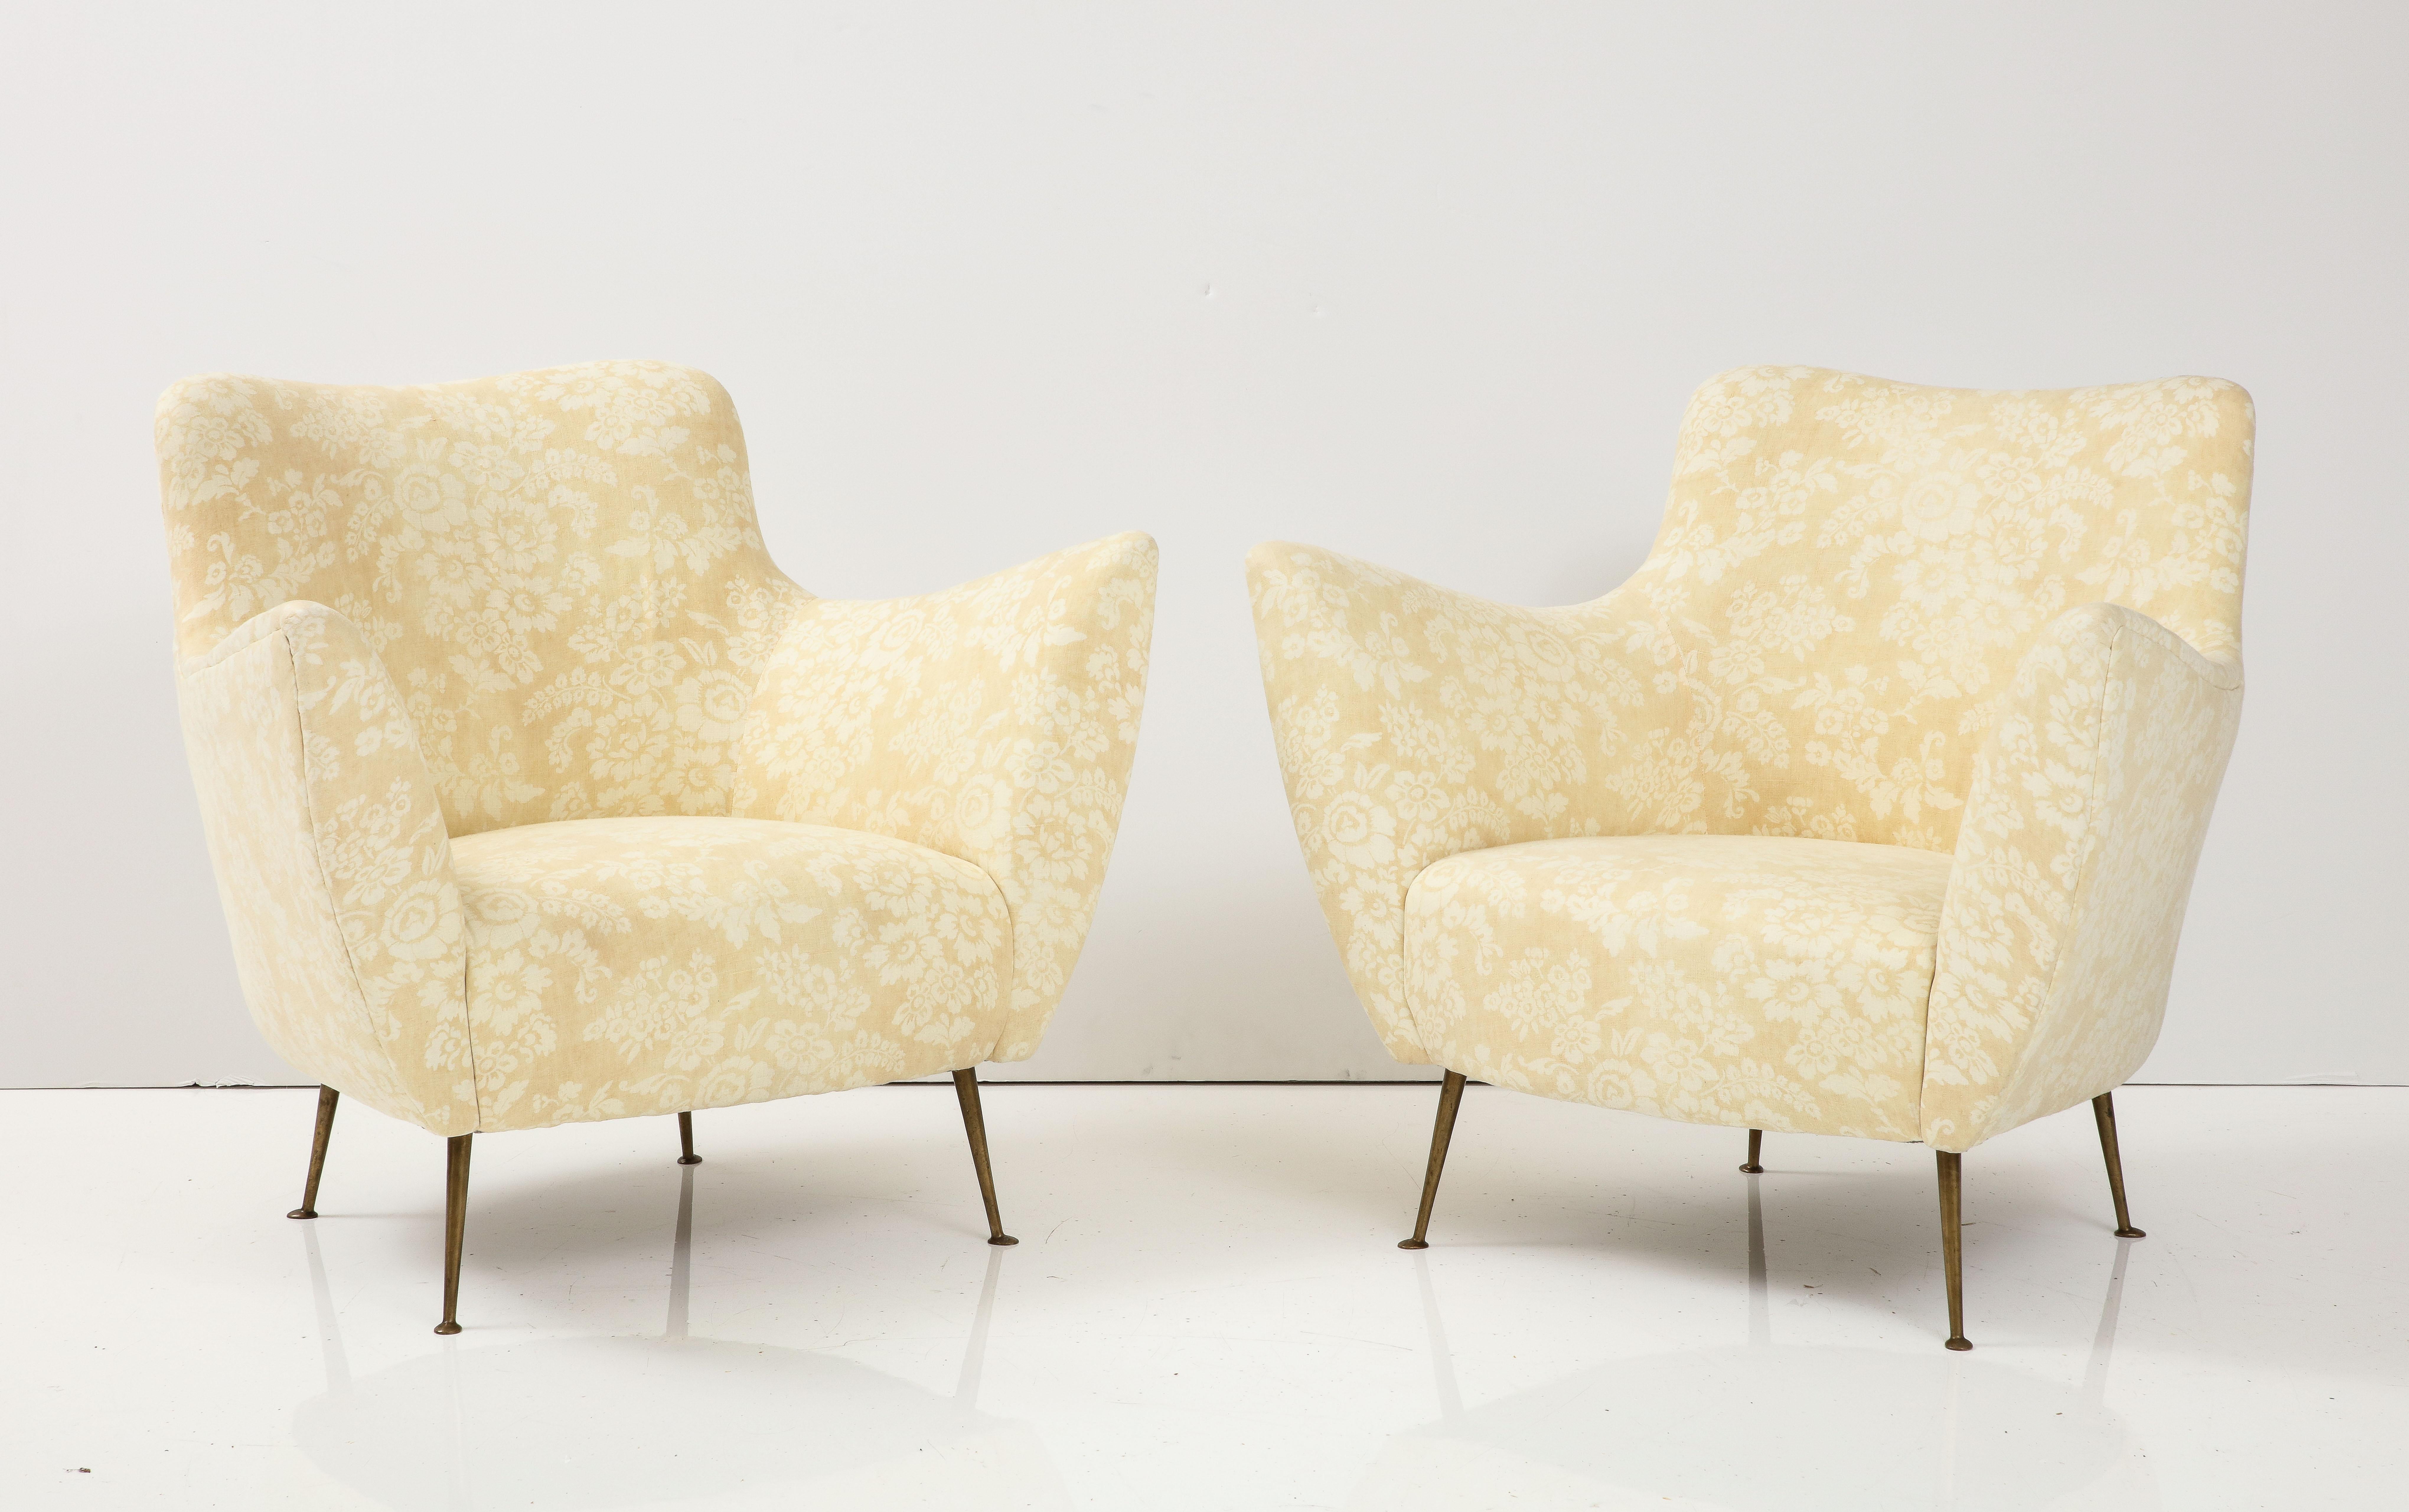 Pair of Lounge Chairs by Guglielmo Veronesi, Italy, c. 1950s. 

These exquisite, sculptural lounge chairs were produced by acclaimed furniture manufacturer ISA Bergamo in the 1950s. They have been newly reupholstered in a yellow floral hemp linen